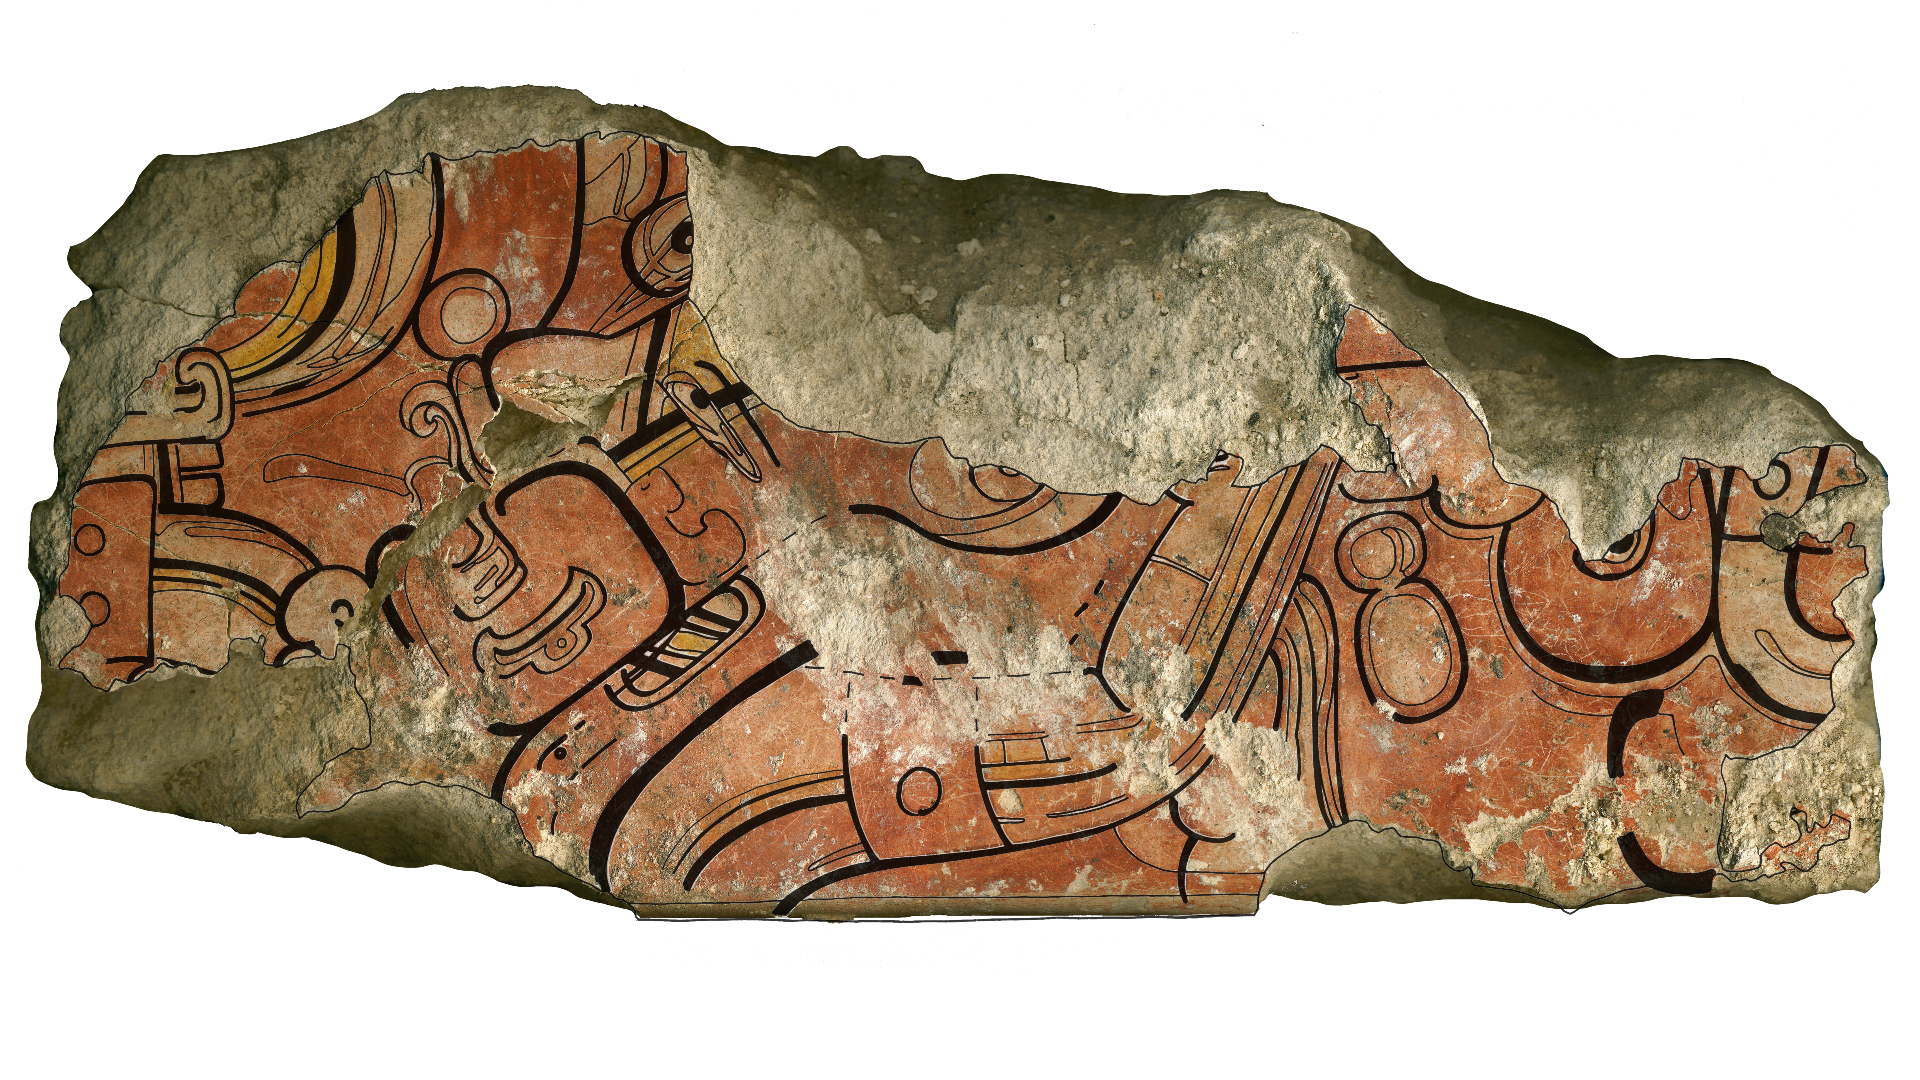 Shards of wall paint on building blocks associated with the structure of the Ixbalamque range.  Mural partial block collected from the Ixbalamque structure, Architectural Phase Sub-V (300-200 BC), Part No. 6368 depicting an image of the late Preclassic Mayan maize god.